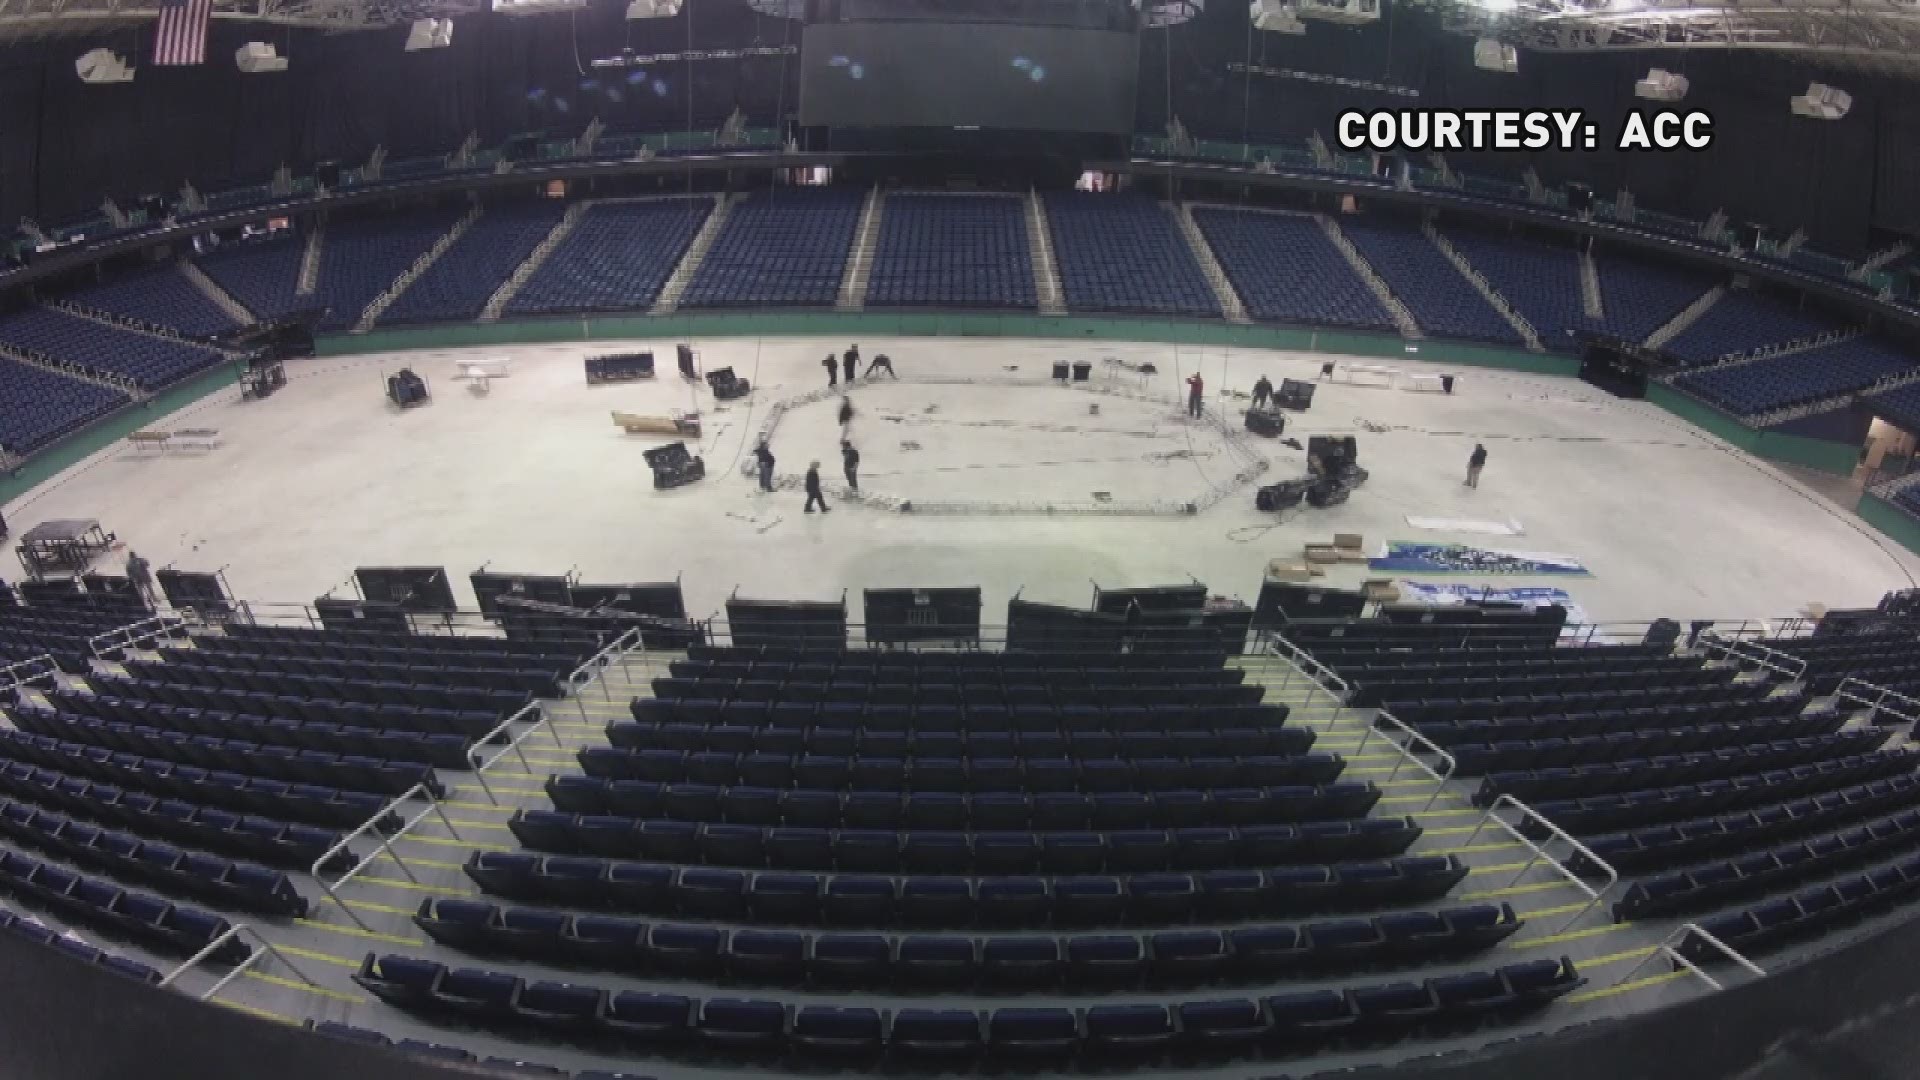 The Greensboro Coliseum is getting ready for the Women’s ACC Tourney. That means in a major transformation in a short amount of time. Check out this time-lapse video from the ACC.